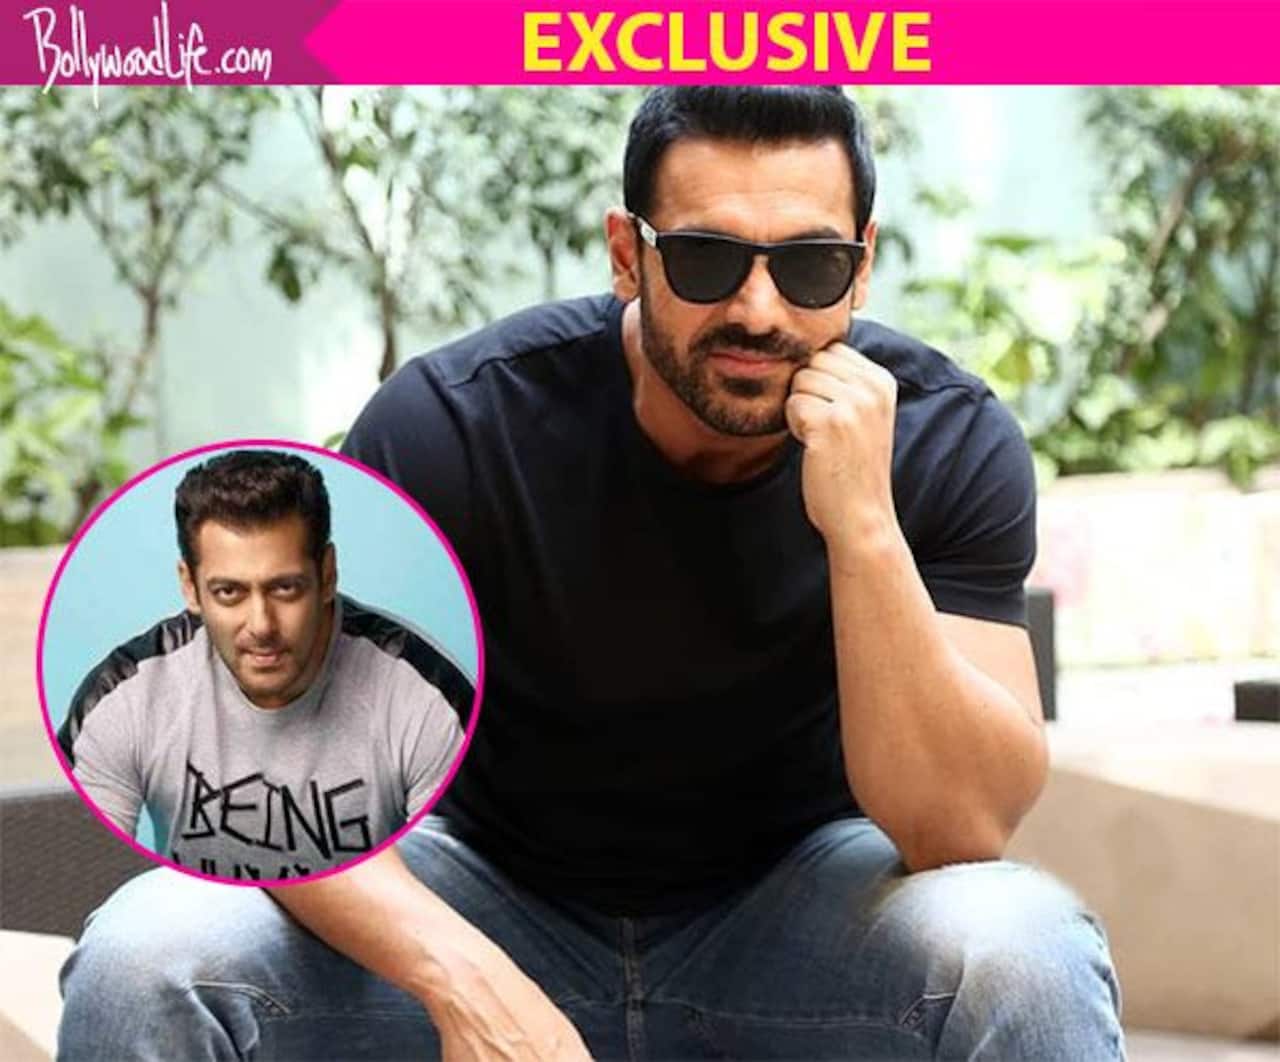 Exclusive! 'Salman Khan is the atom bomb of Bollywood,' says Parmanu actor John  Abraham - Bollywood News & Gossip, Movie Reviews, Trailers & Videos at  